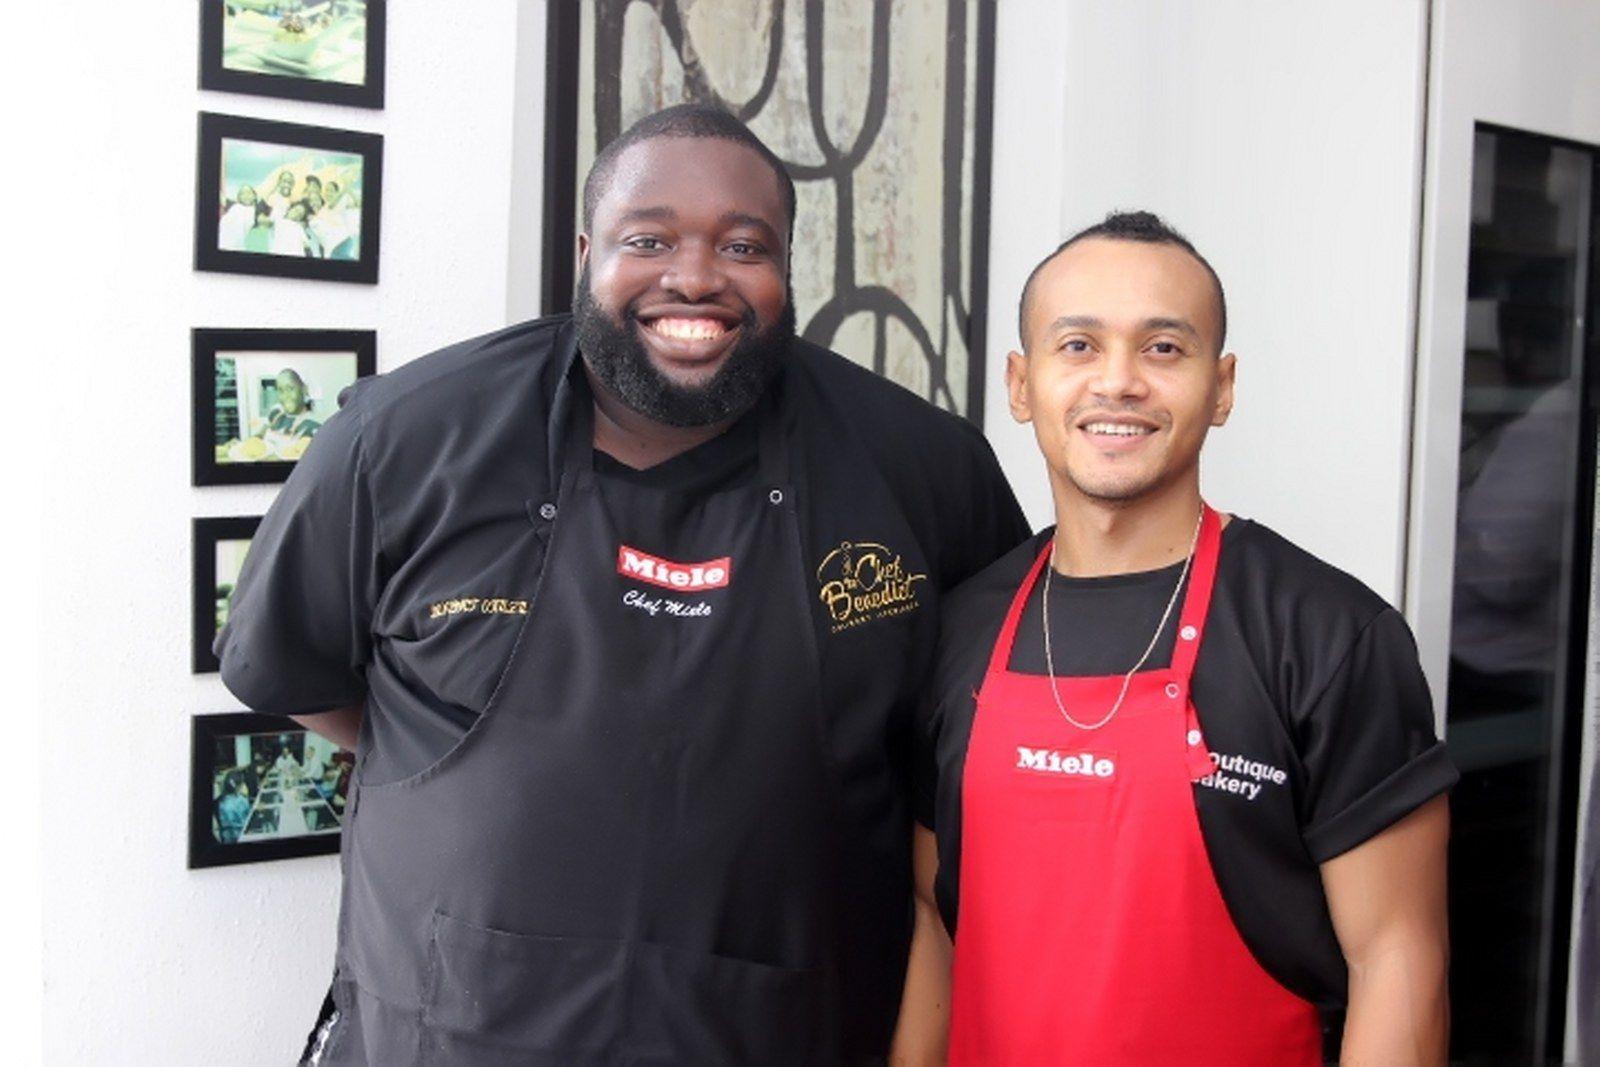 Two Chefs, A Few Foodies & Live Cooking #GTBankFoodDrink Mixer thumbnail